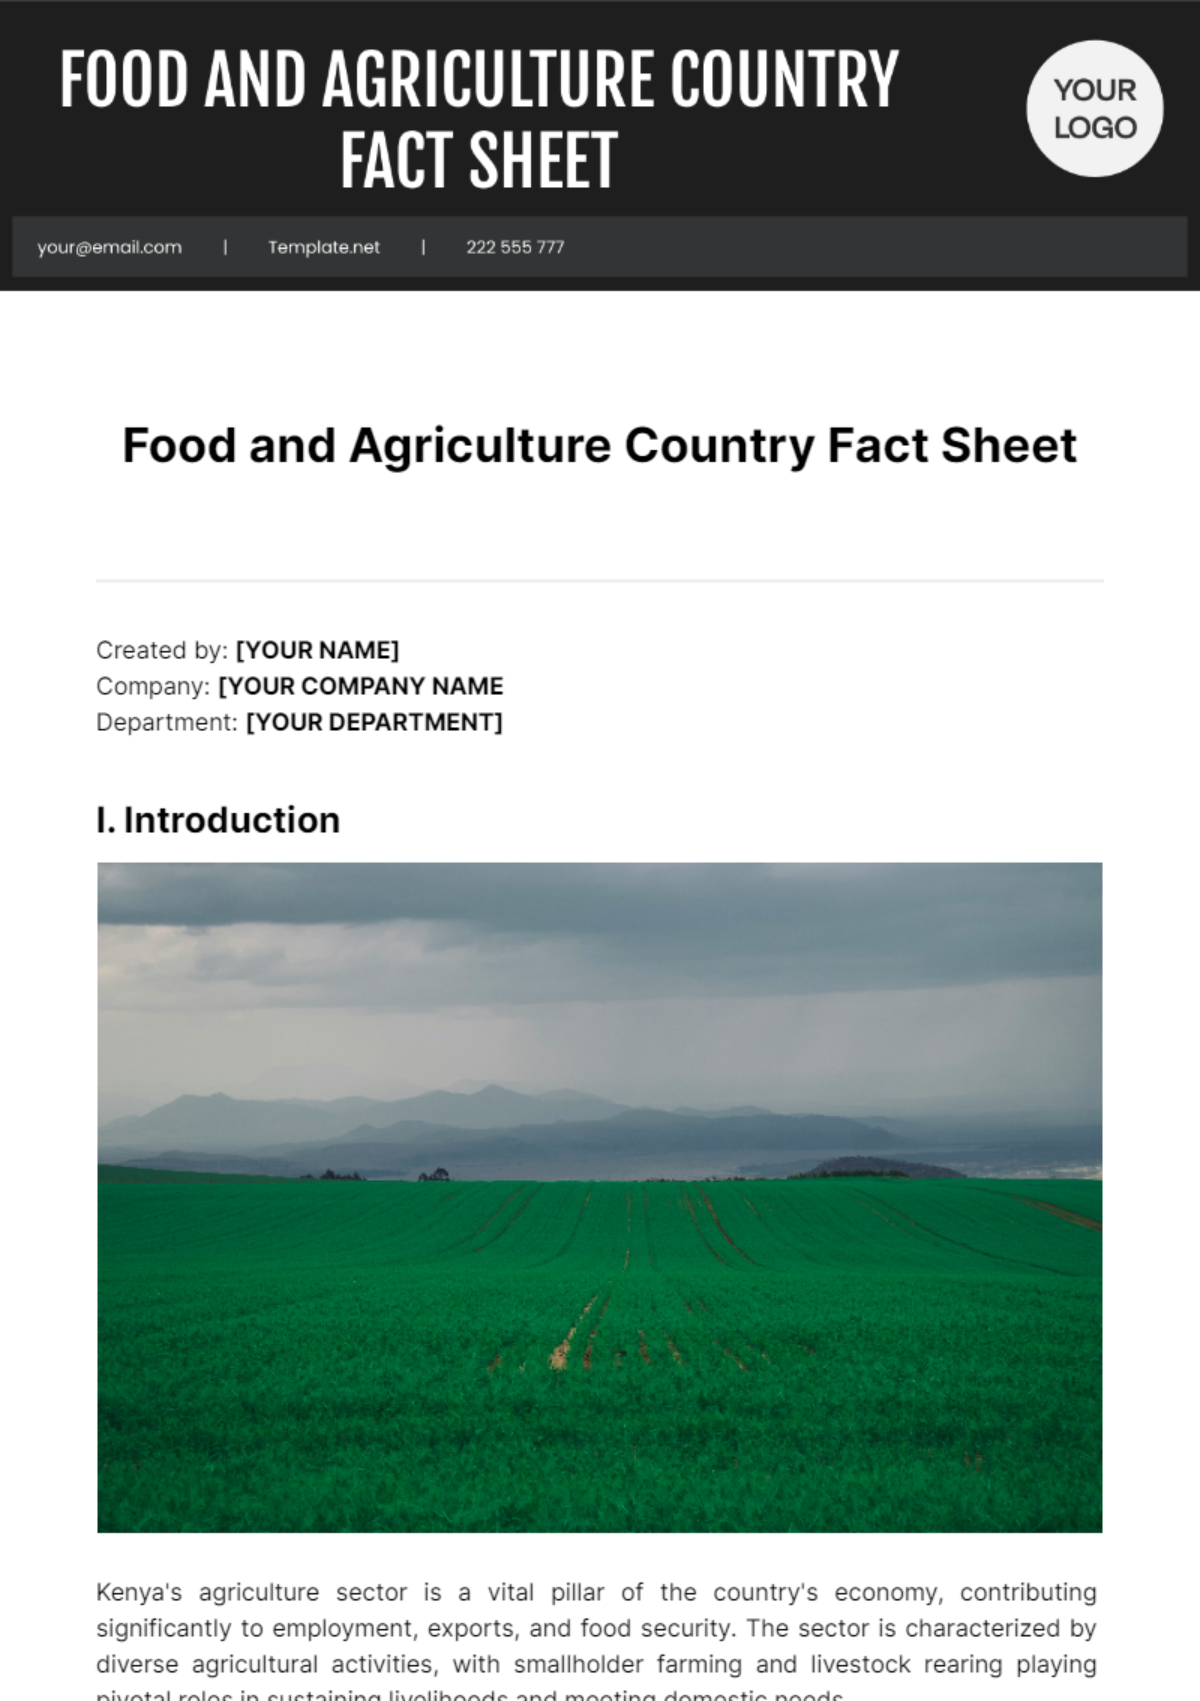 Food And Agriculture Country Fact Sheet Template